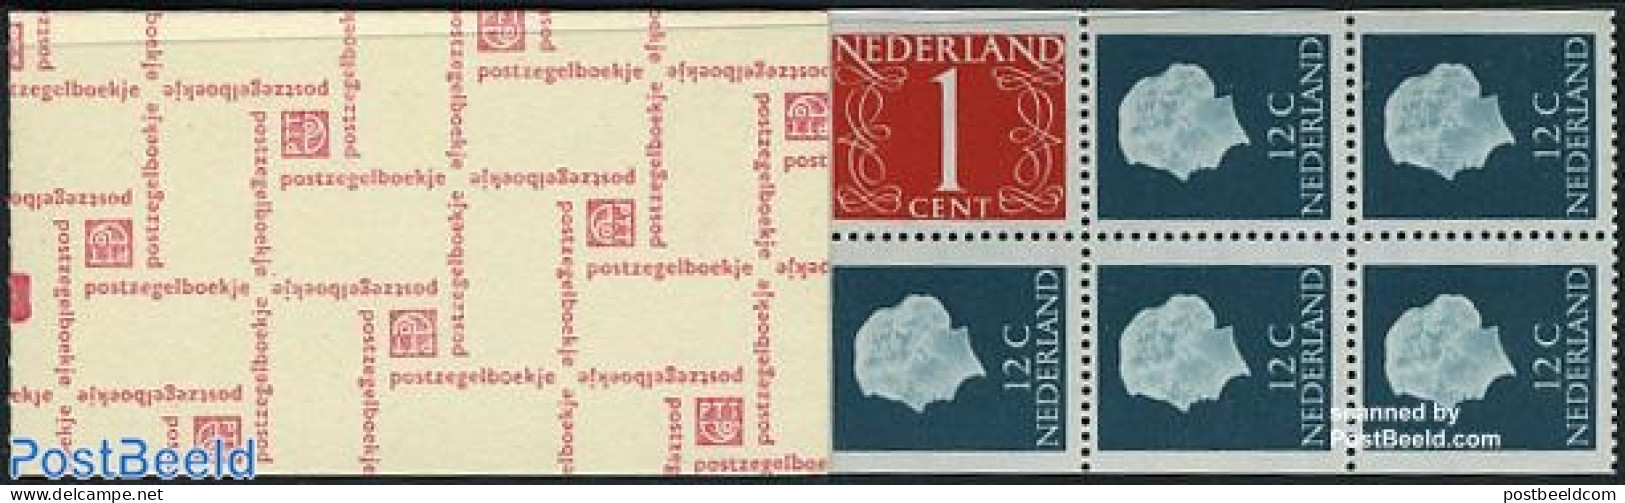 Netherlands 1969 4x1c+8x12c Booklet With Counter Block, Postgiro Ge, Mint NH - Unused Stamps